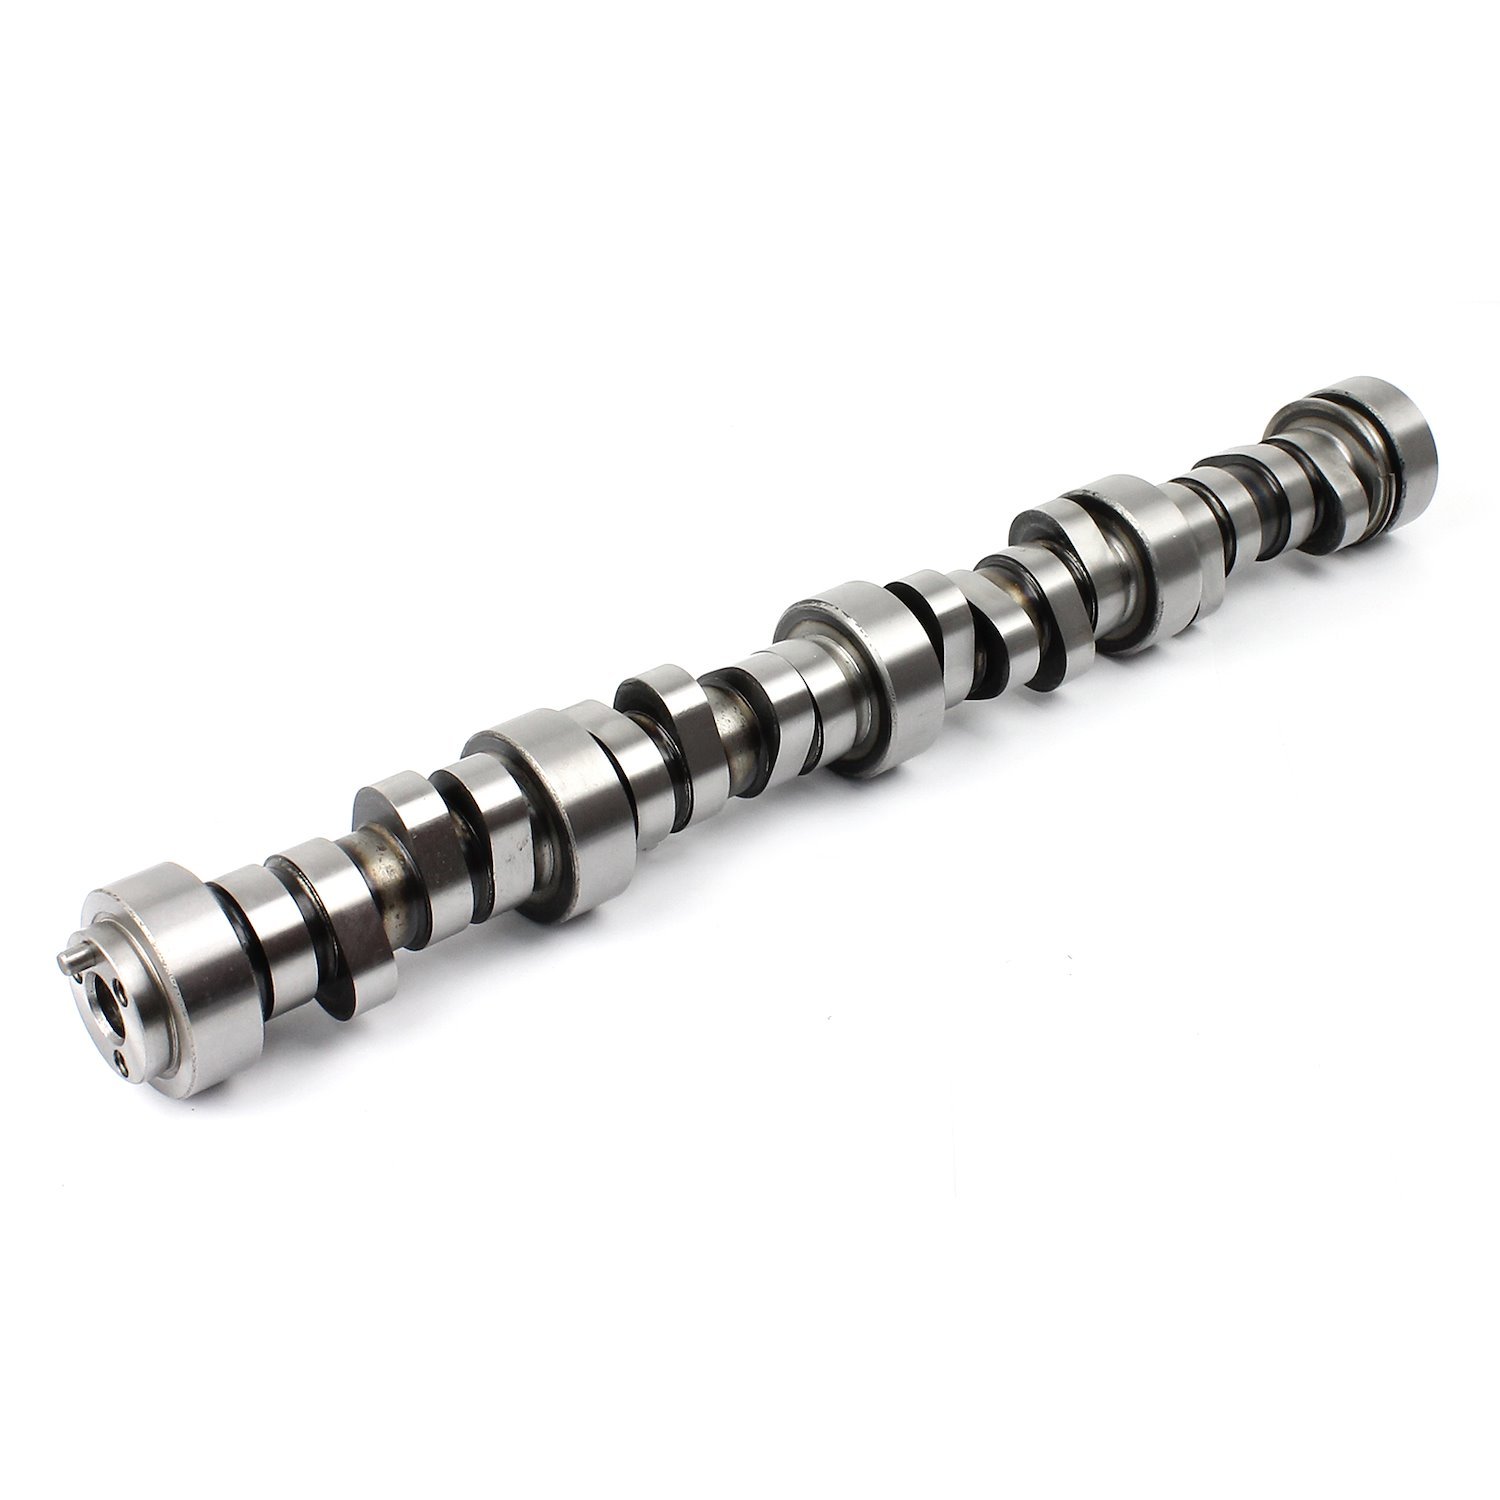 Chevy LS1 LS2 LS6 Hydraulic Roller Tappet Camshaft .525/.525 Lift